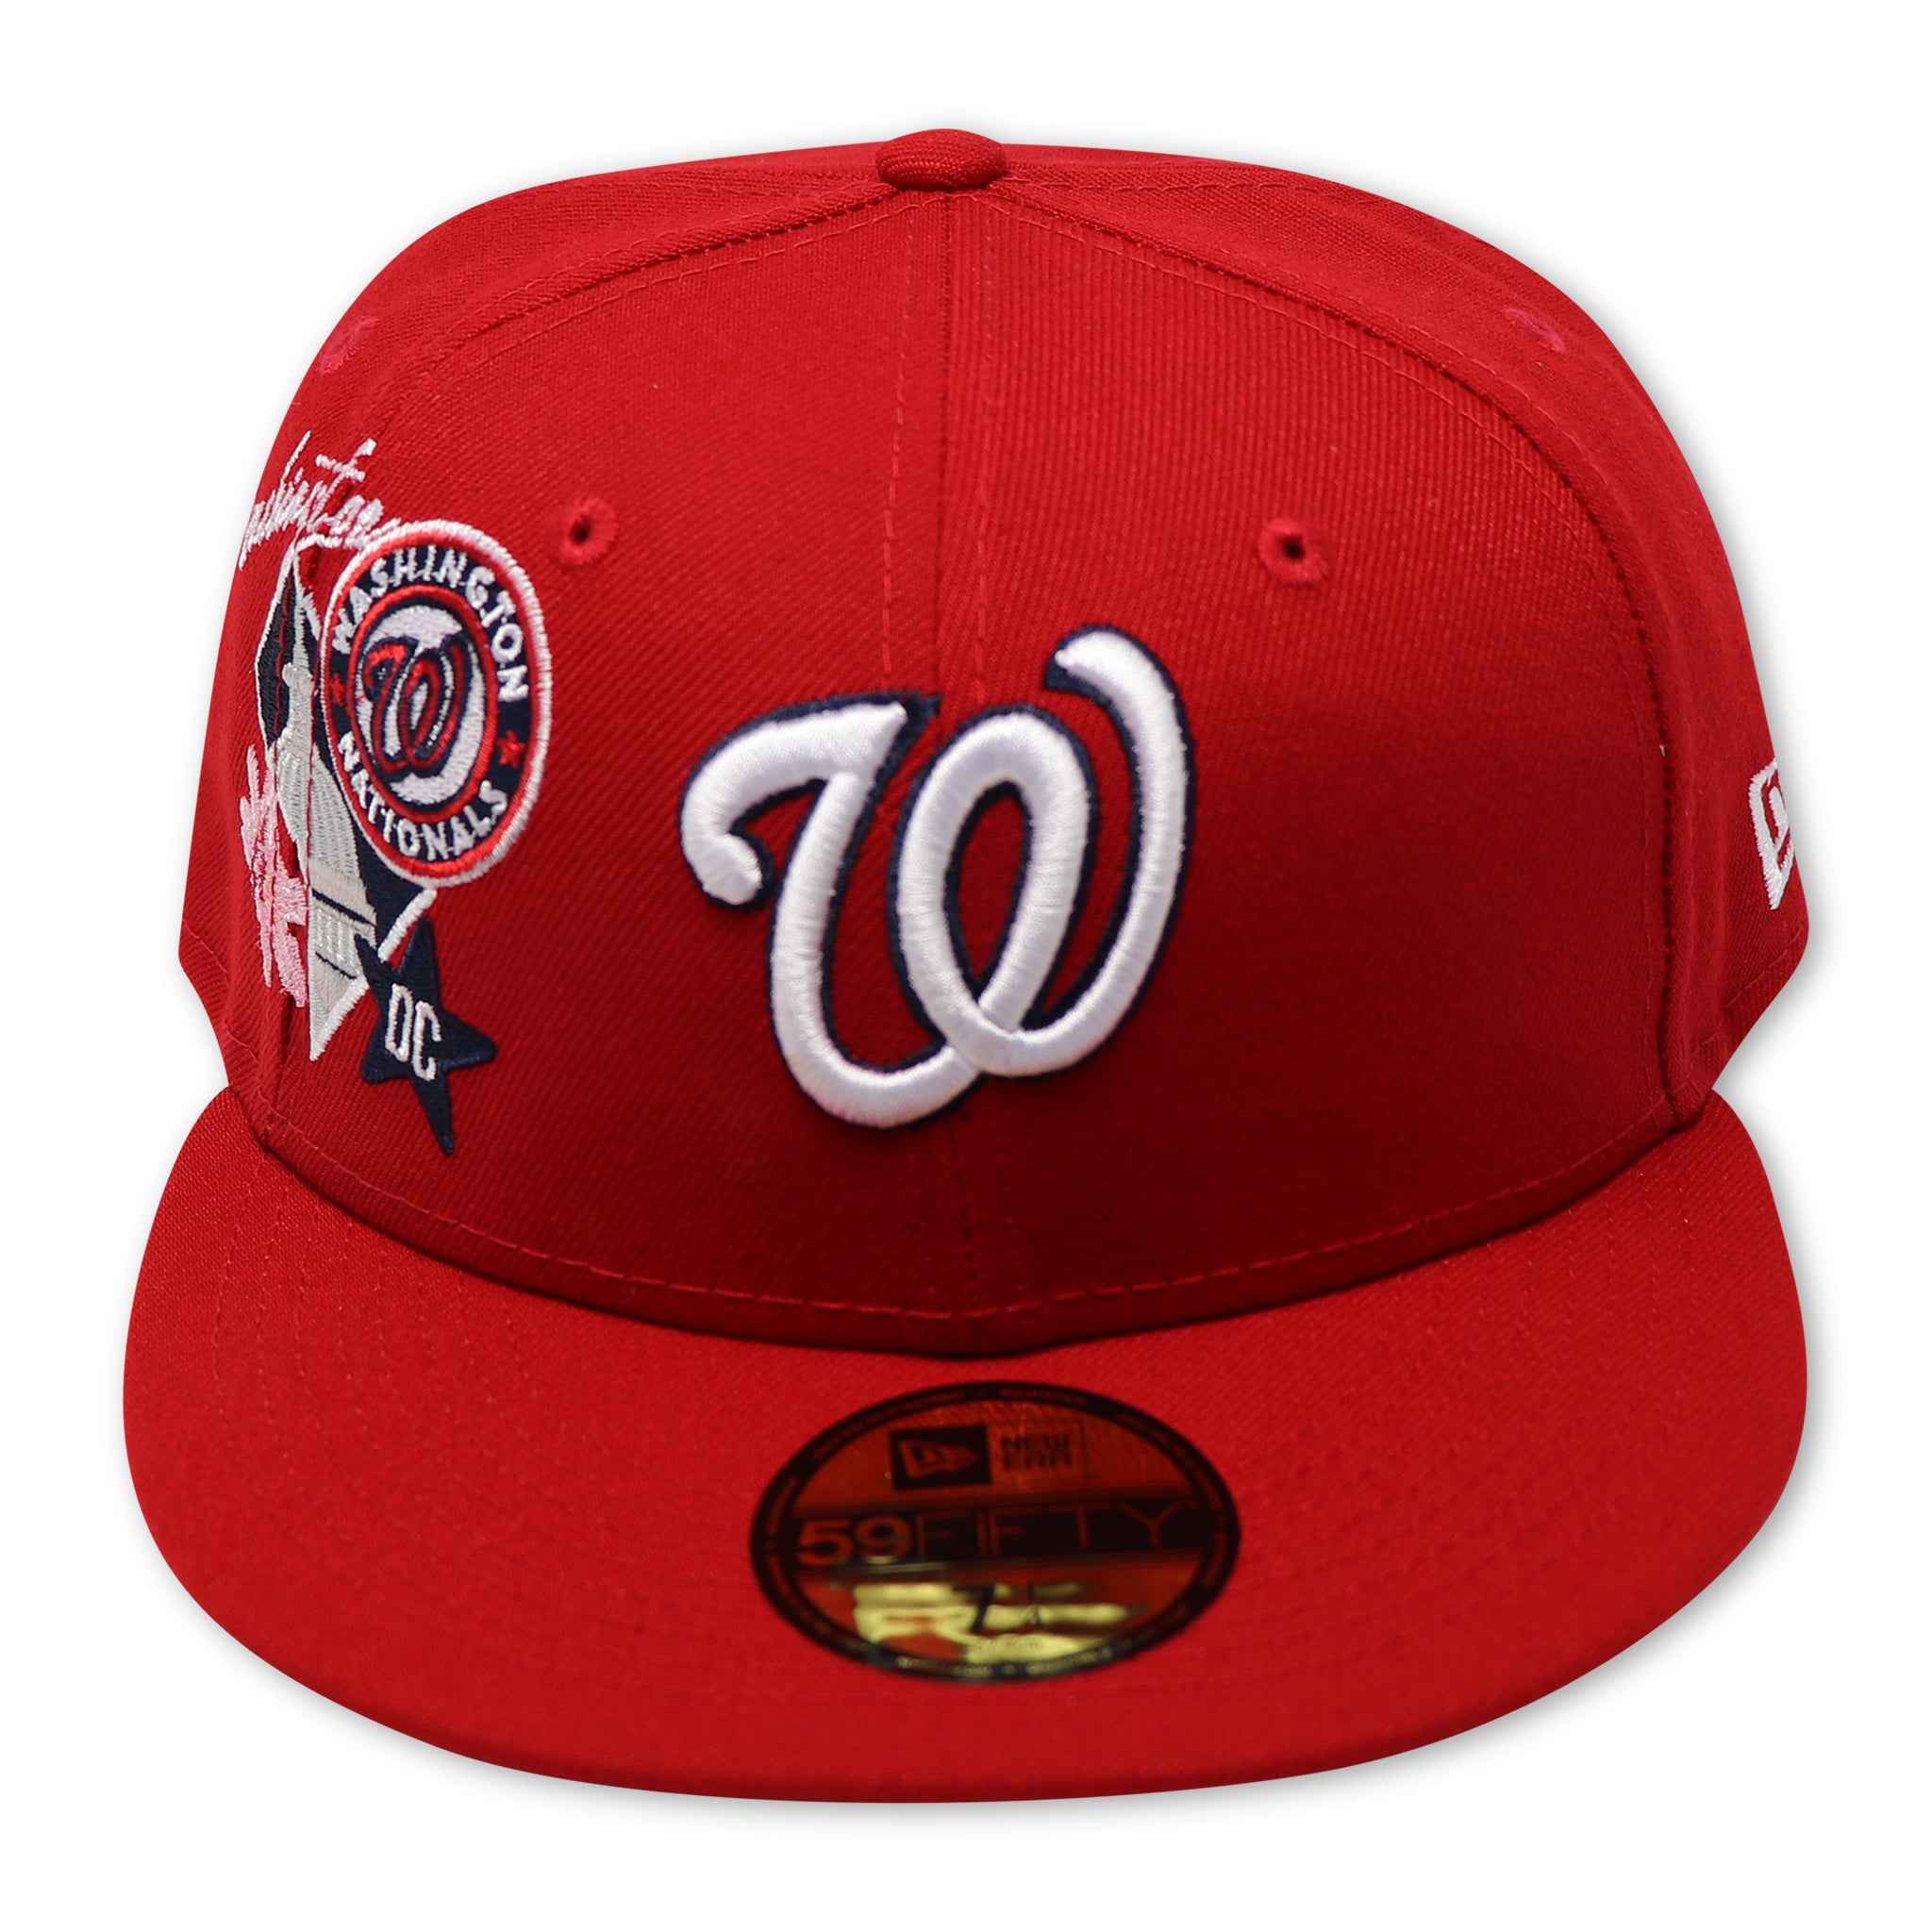 WASHINGTON NATIONALS CITY CLUSTER NEW ERA 59FIFTY FITTED